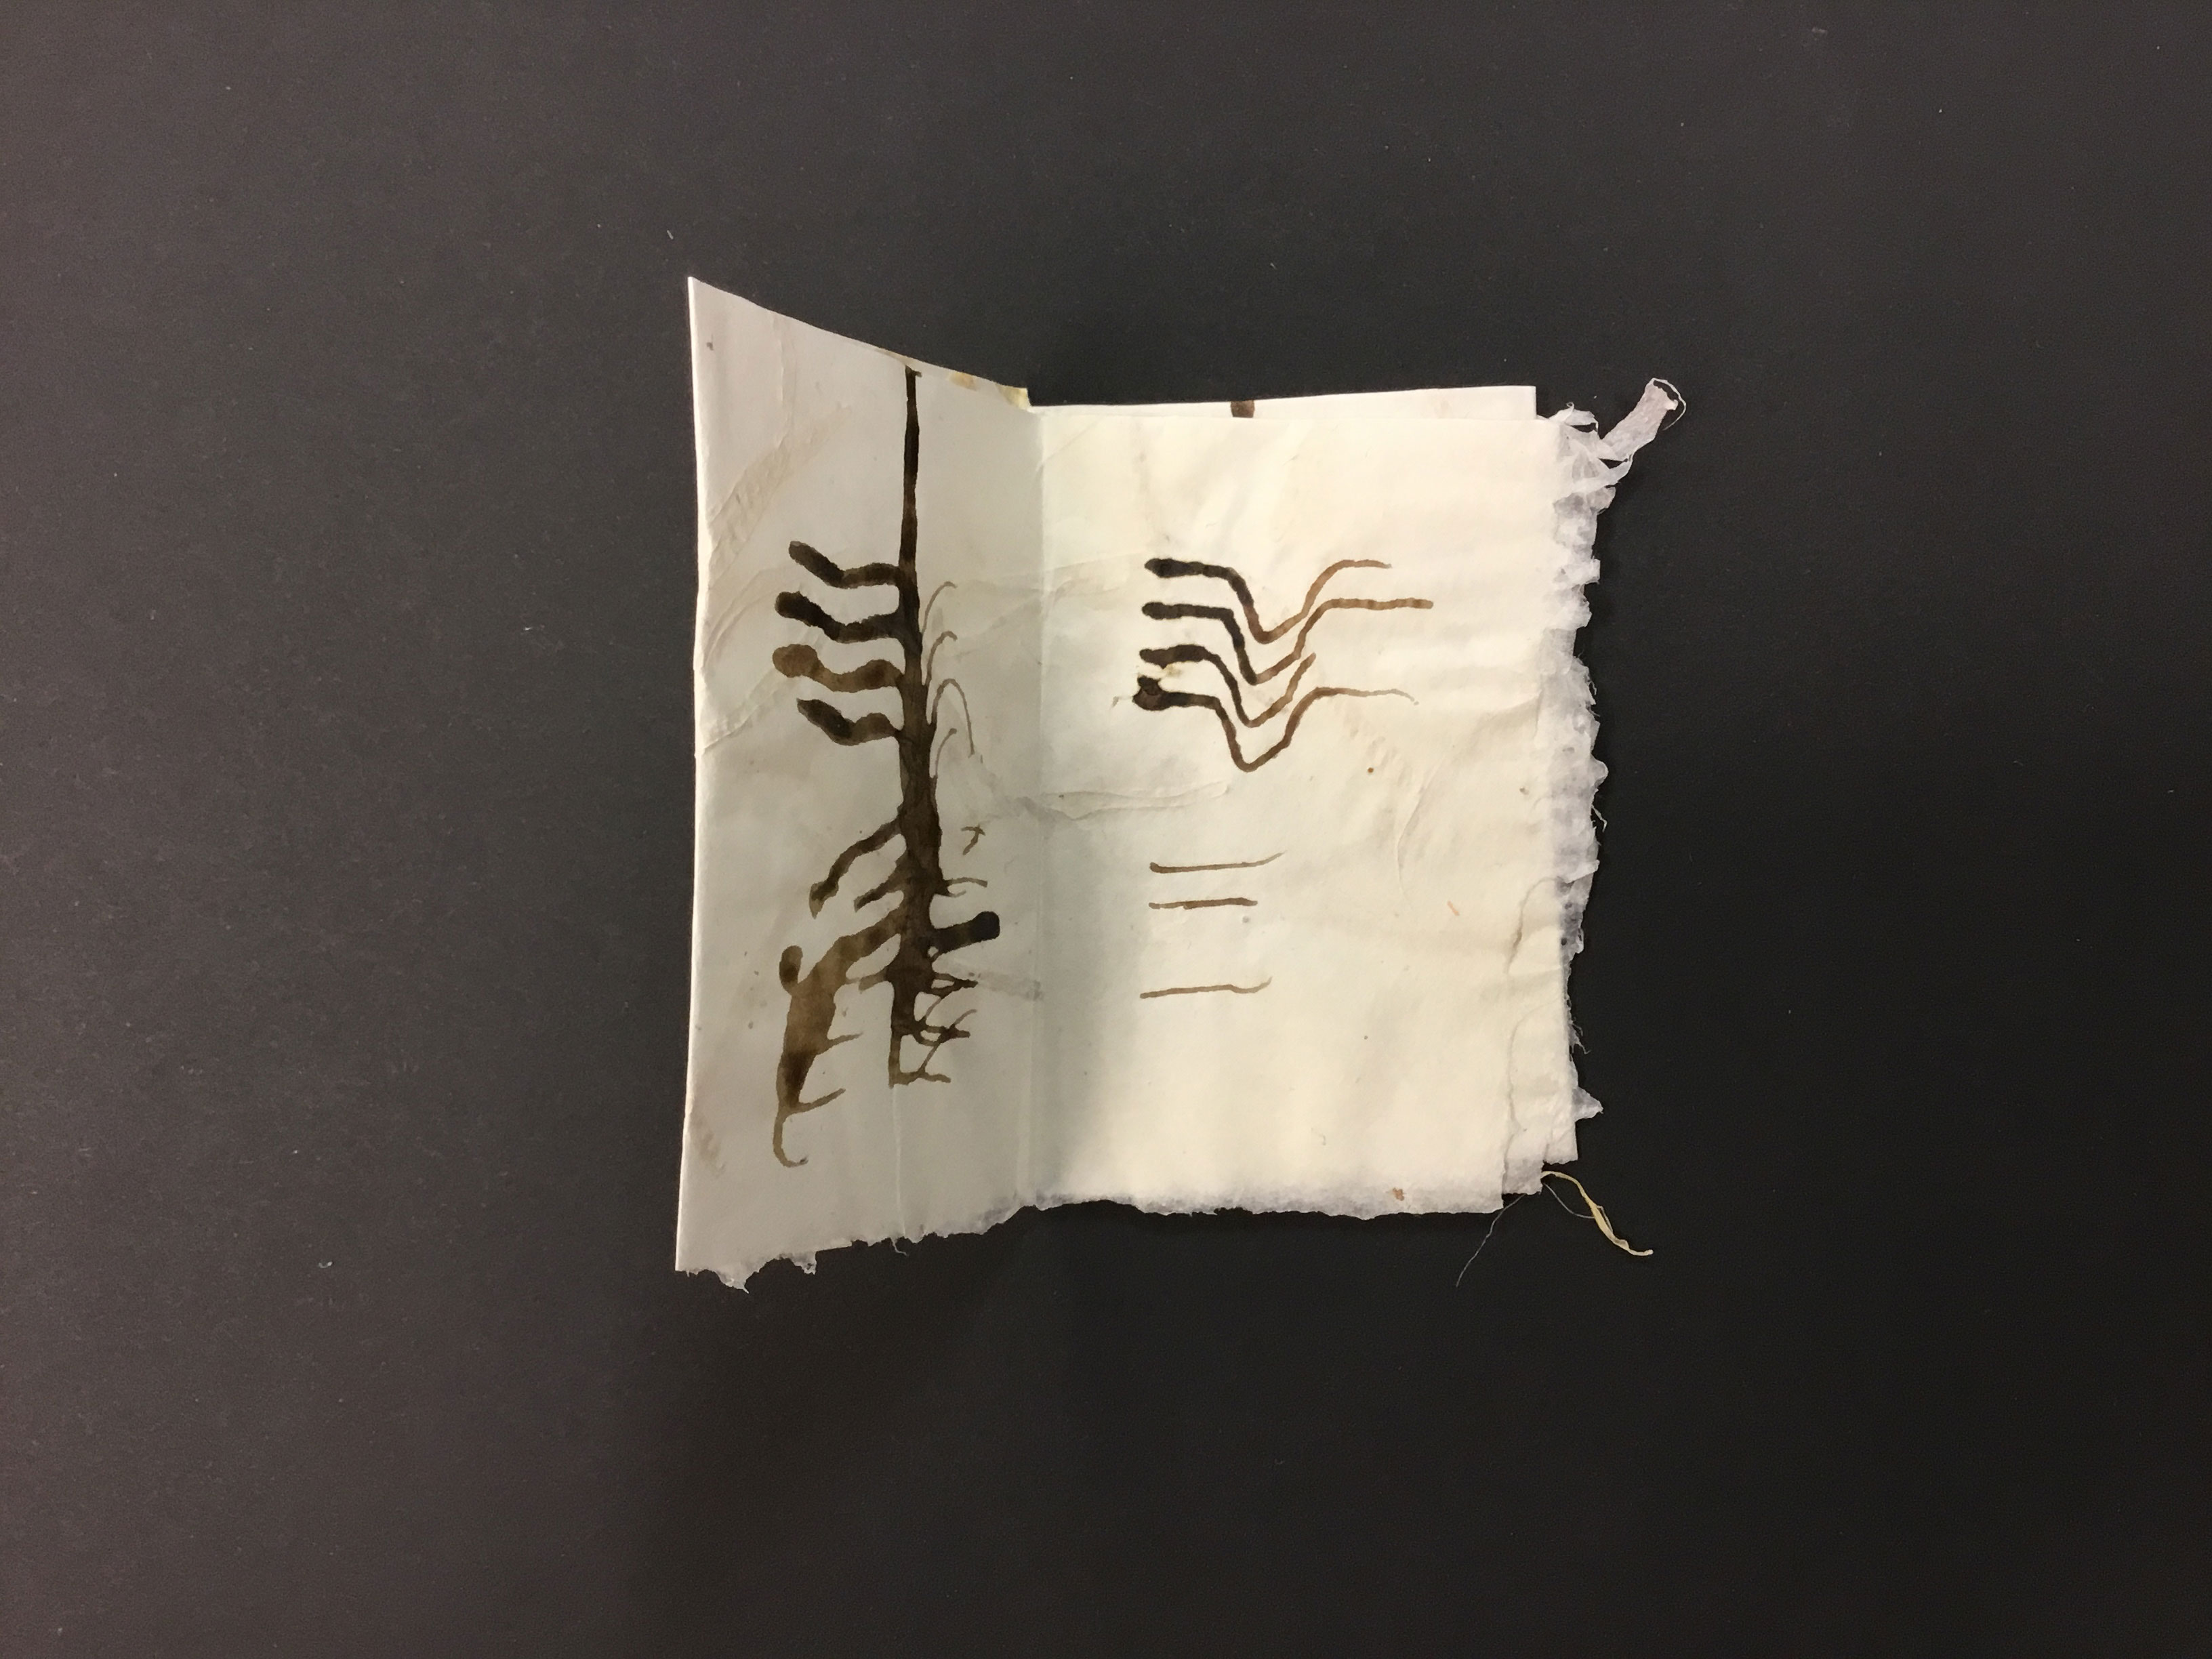 This piece is a small, handmade paper booklet with the word “Shift” written in cursive lettering on the front. This piece is made from abaca with Roja kale and seed pod inclusions, and each page has different linear sketches painted in brown ink.